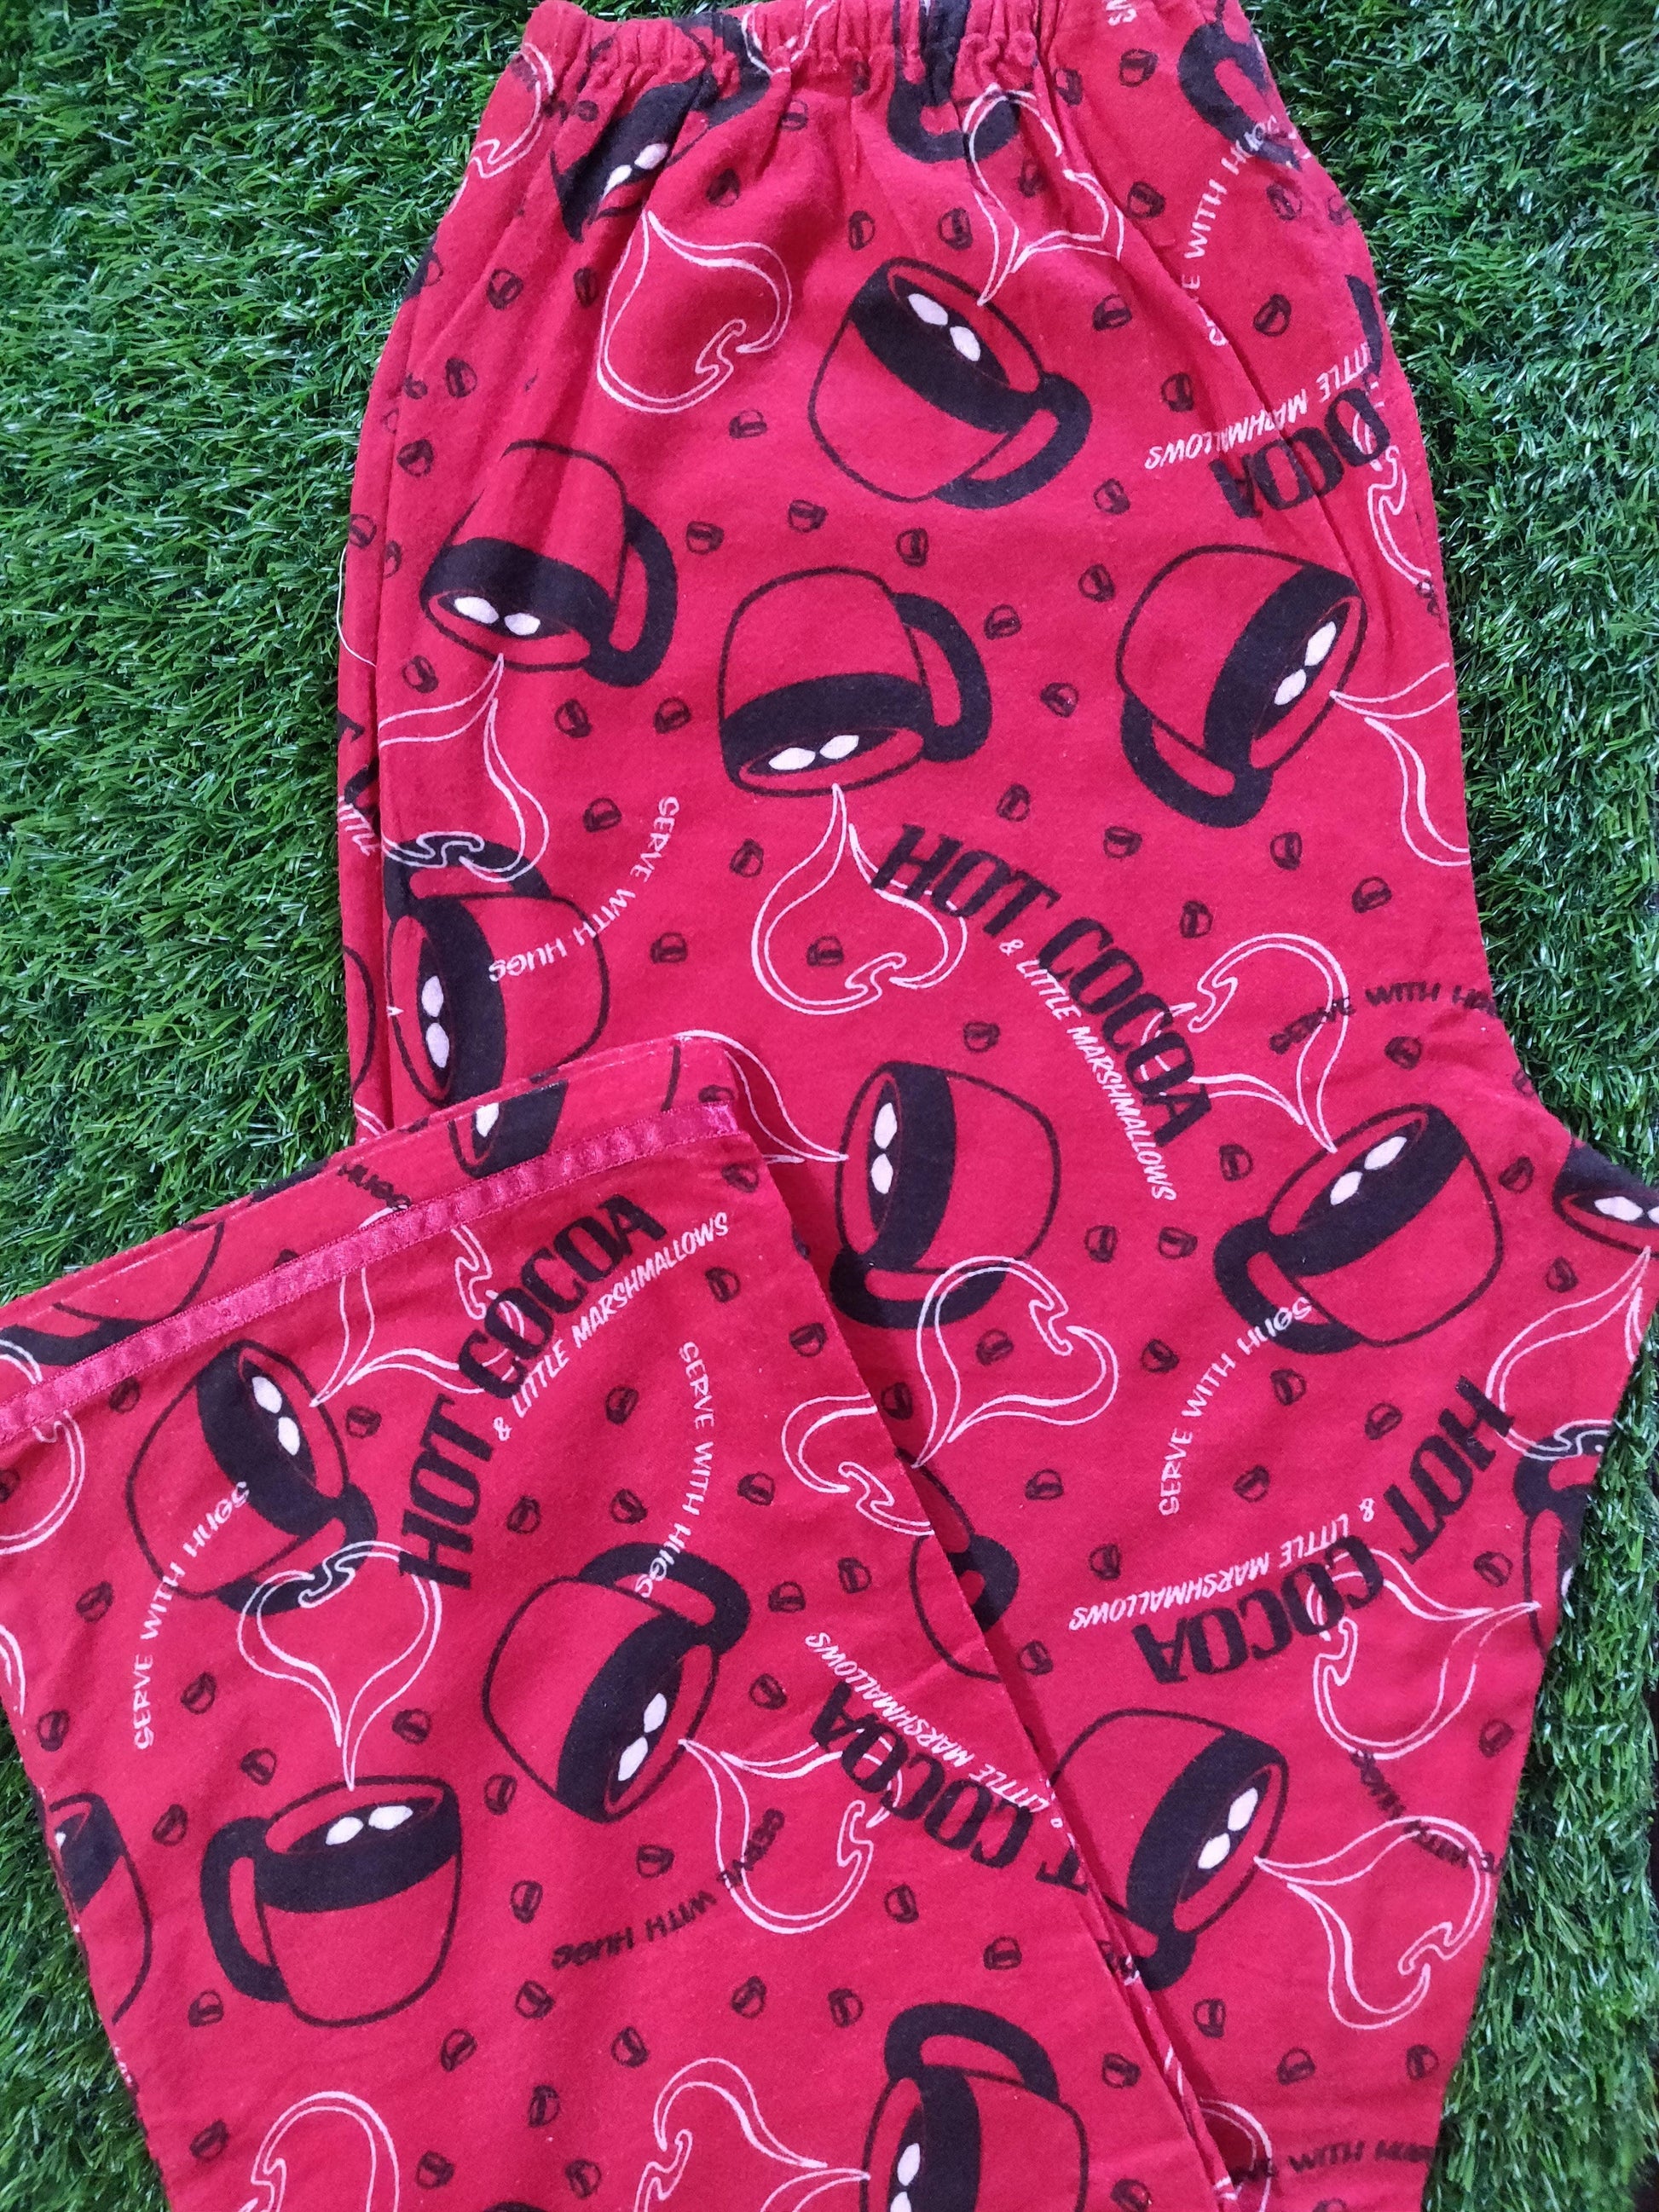 Red Winter Wear Flannel Lounge Pant Pajama PJ02 - Ethnic's By Anvi Creations